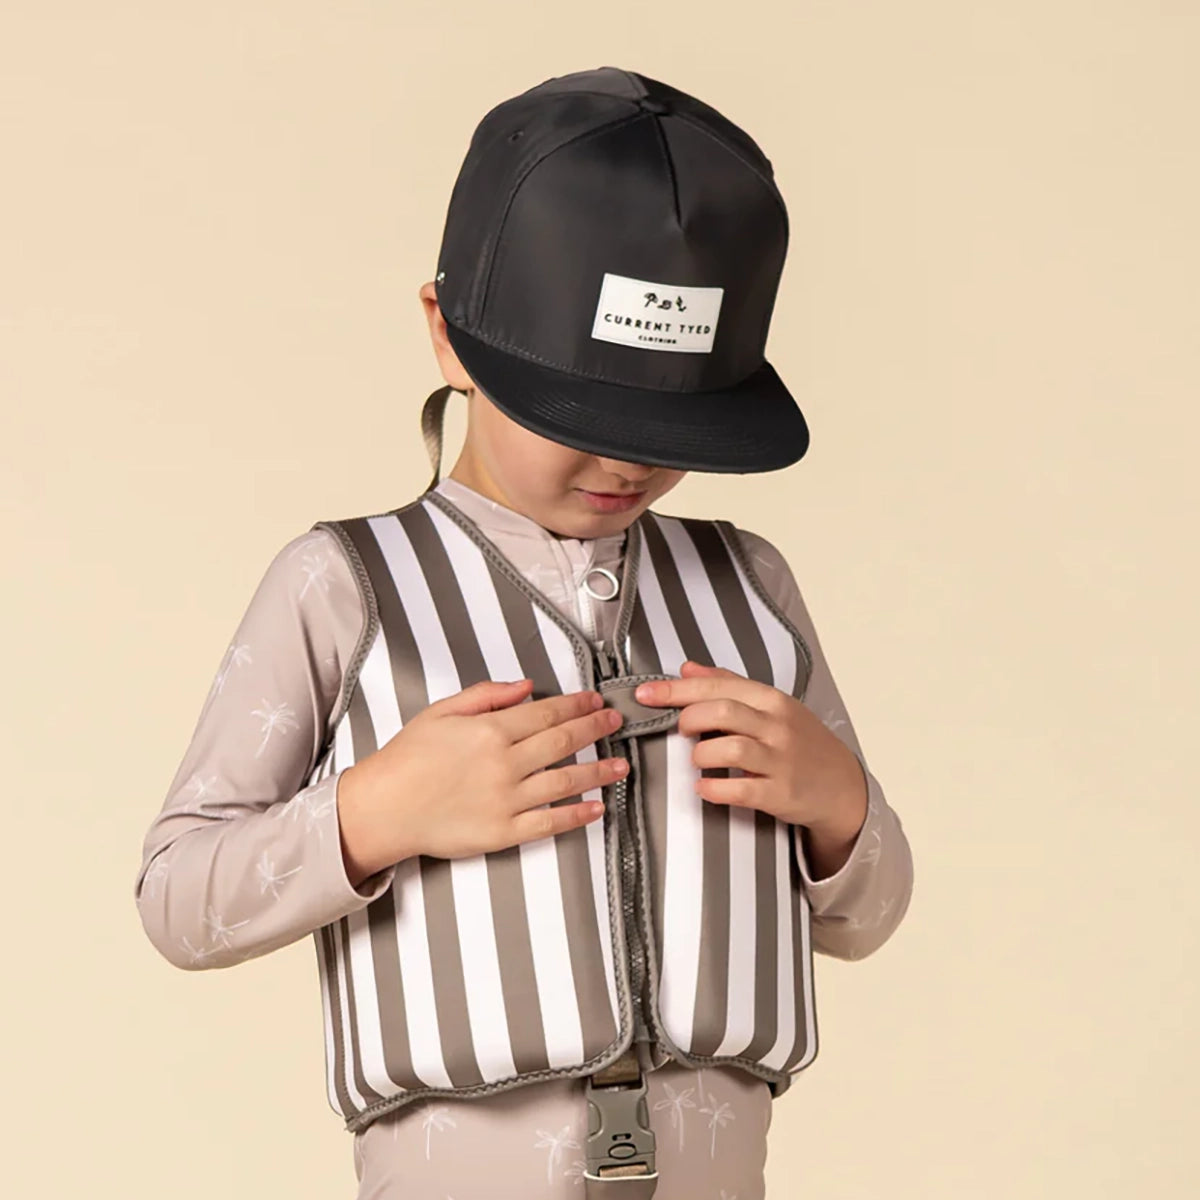 Boy wearing Current Tyed Clothing Made for "Shae'd" Waterproof Snapback - Charcoal